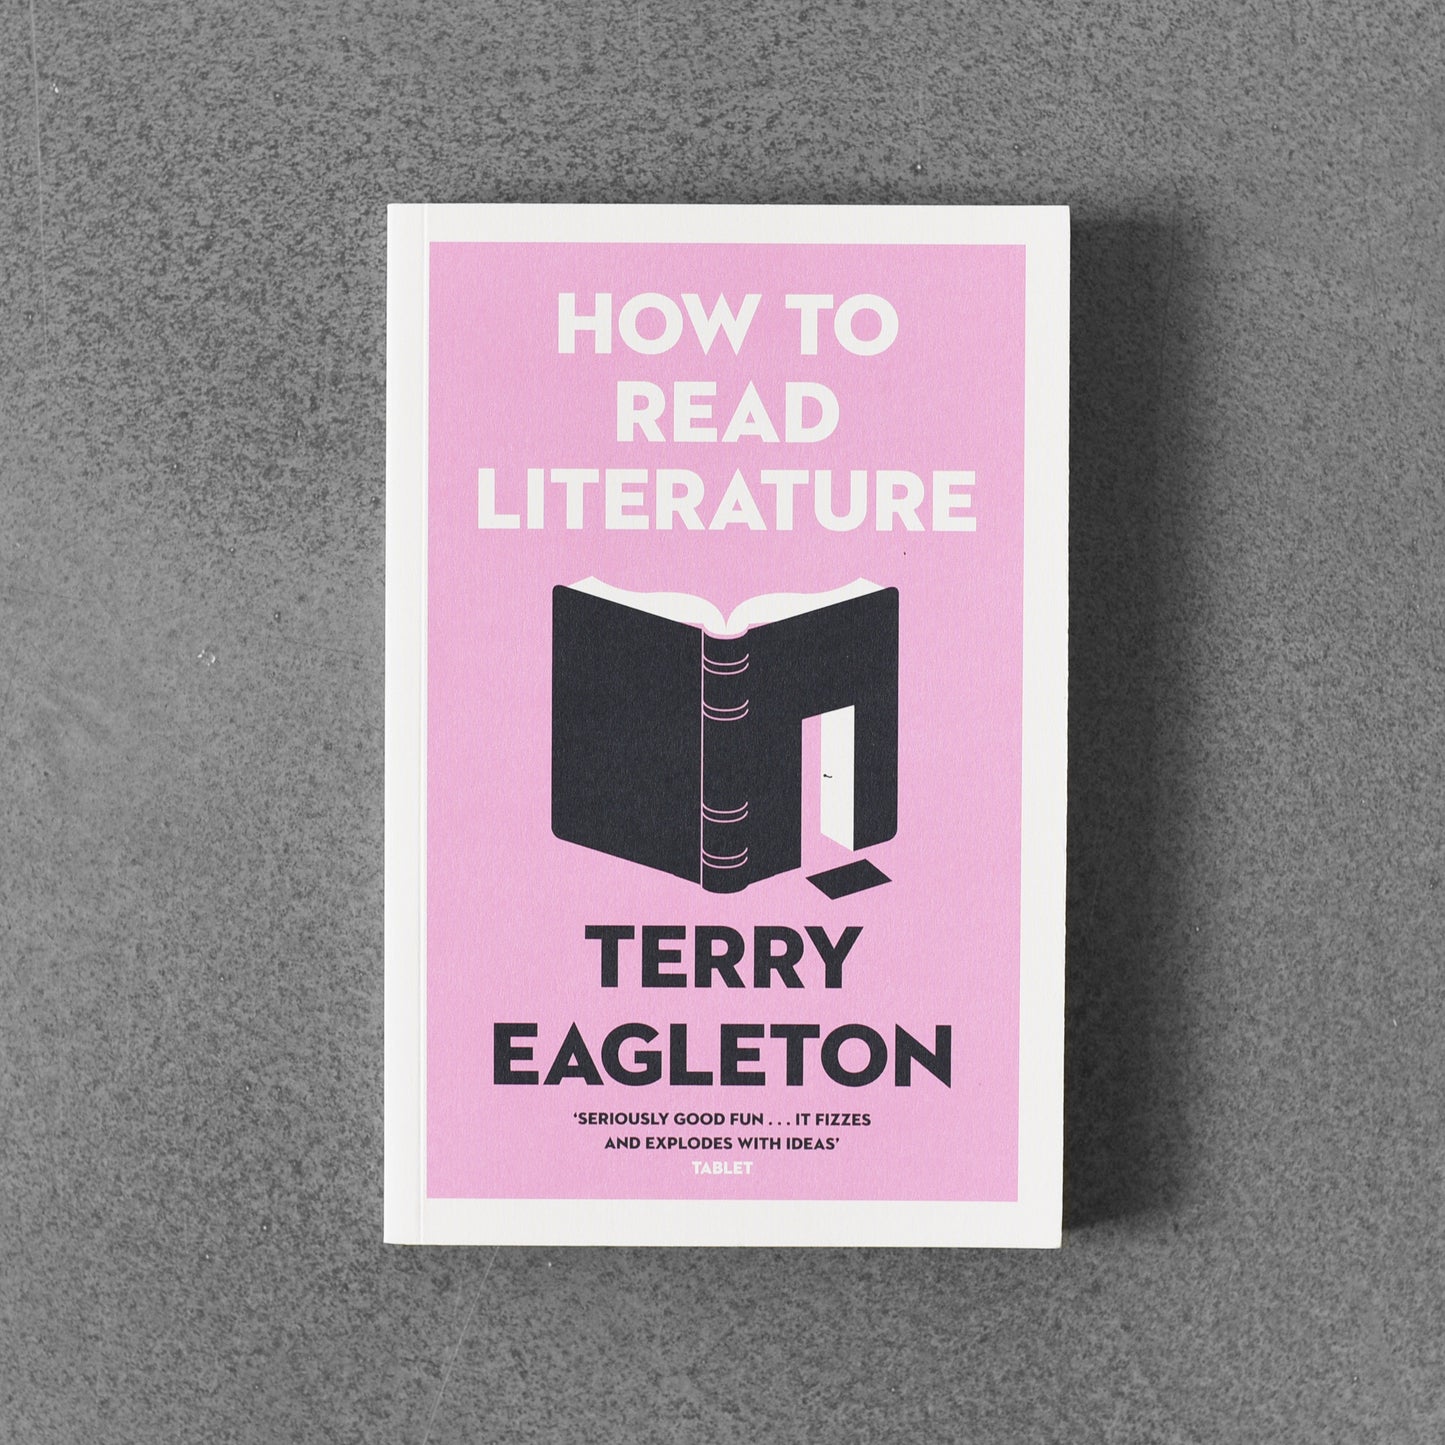 How to Read Literature - Terry Eagleton